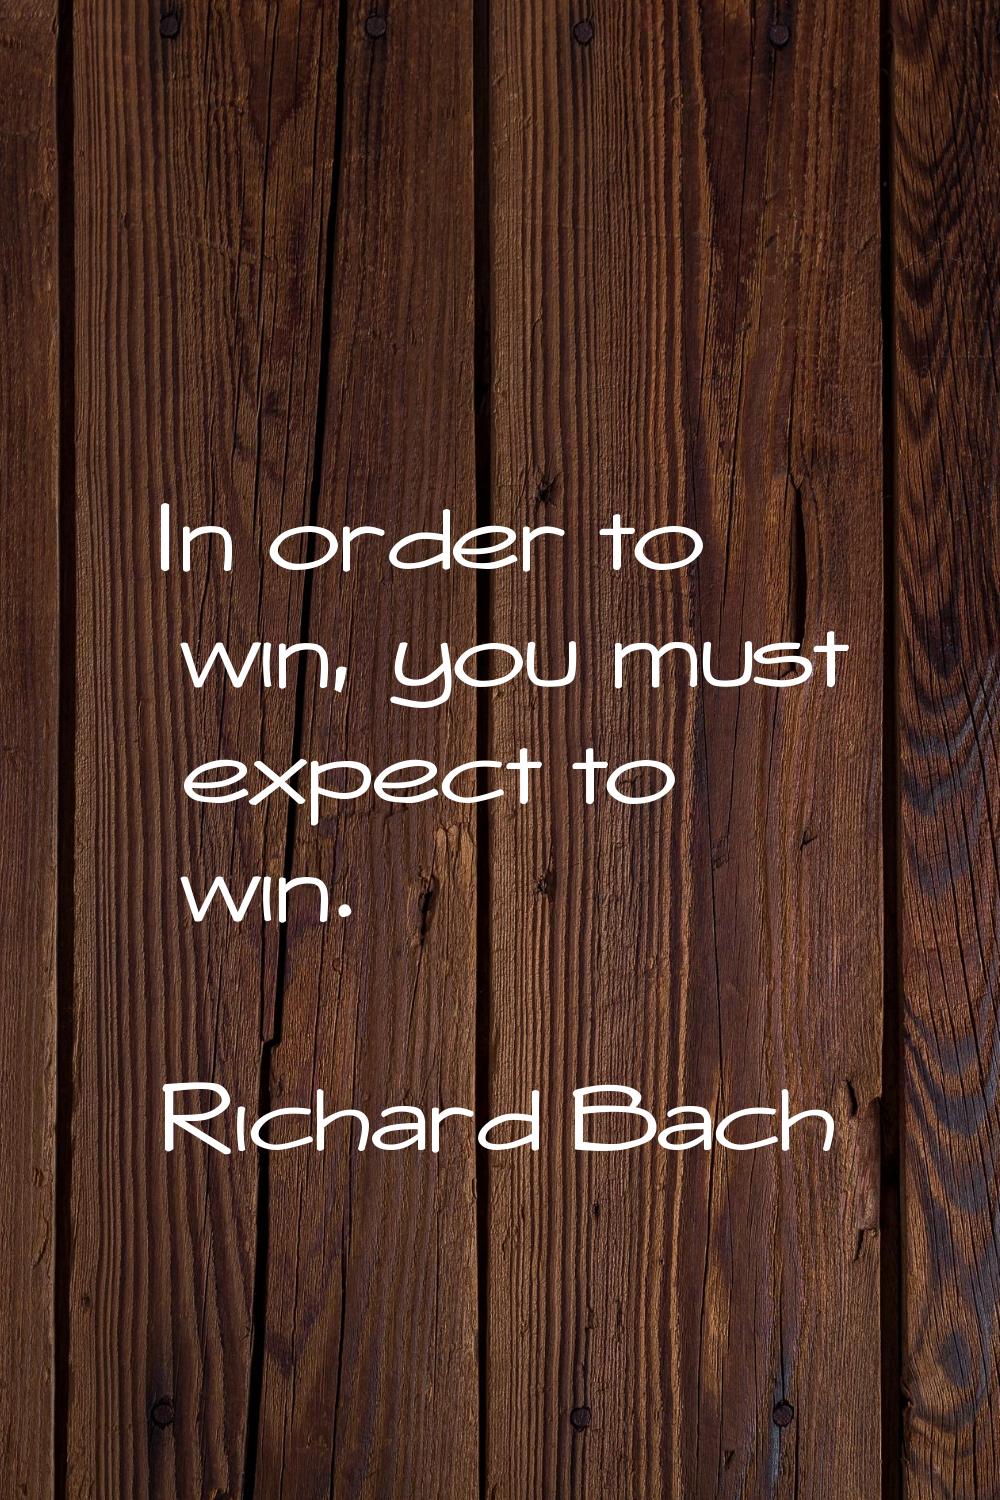 In order to win, you must expect to win.